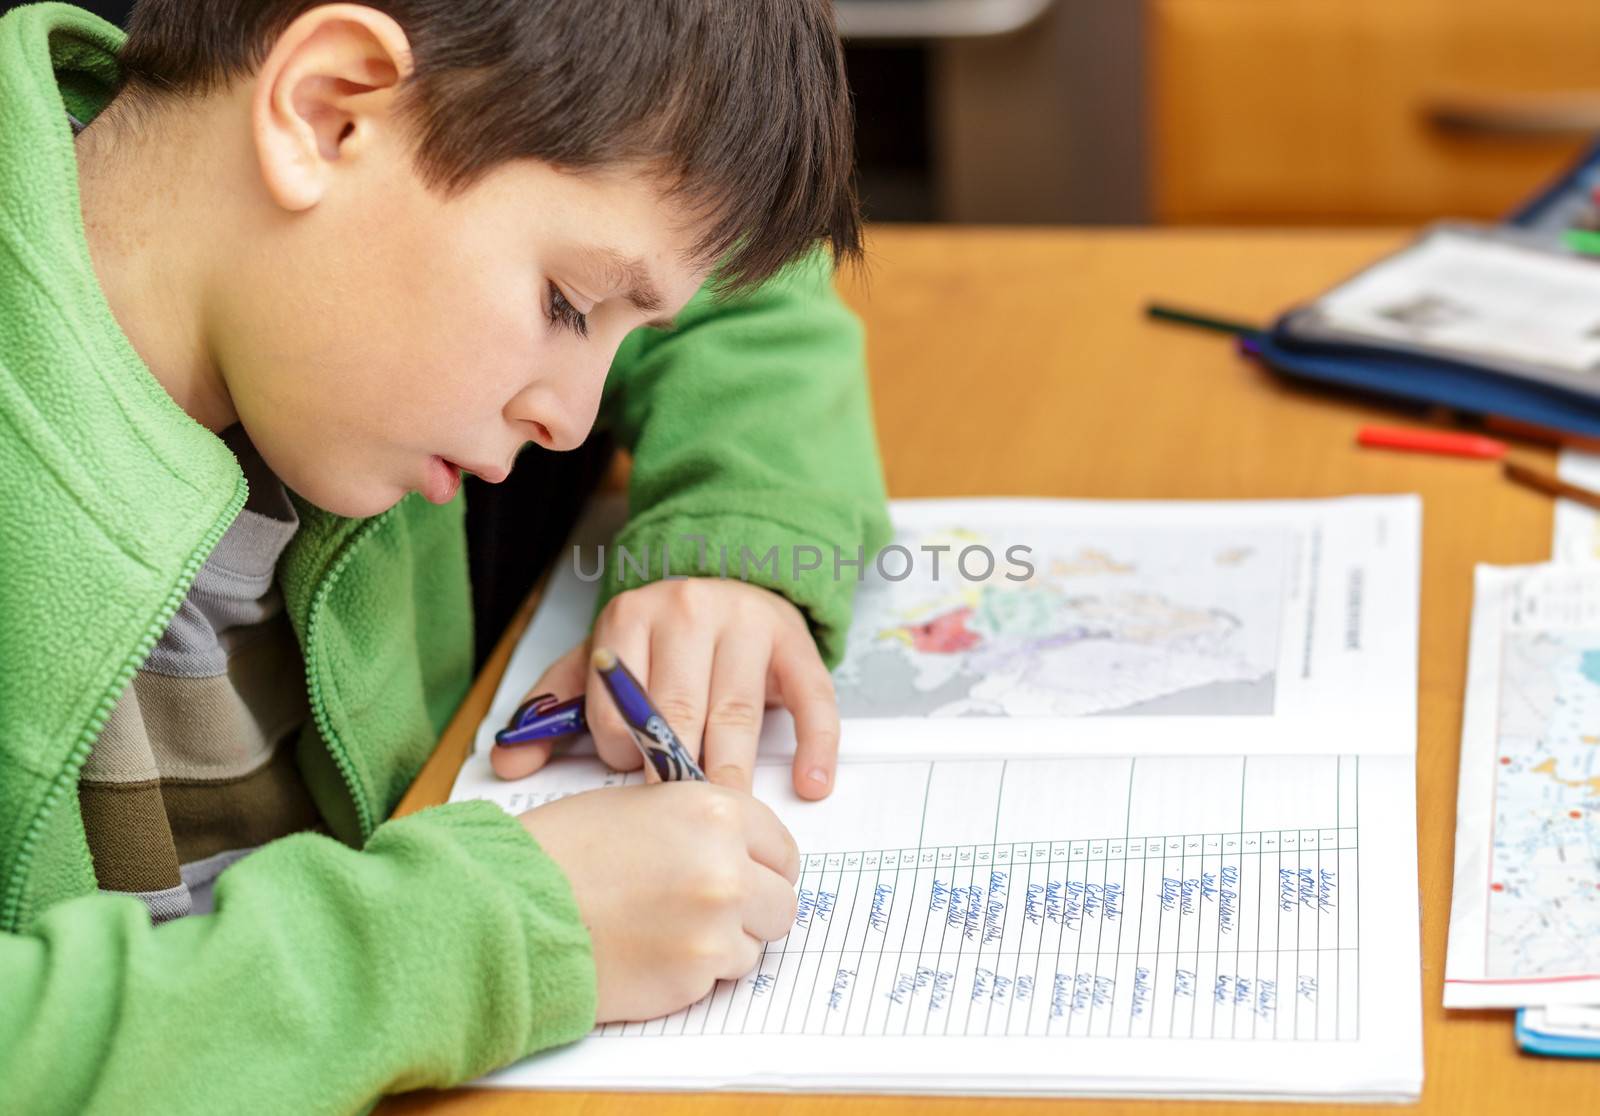 bored and tiredboy doing homework from school in workbook using worl map